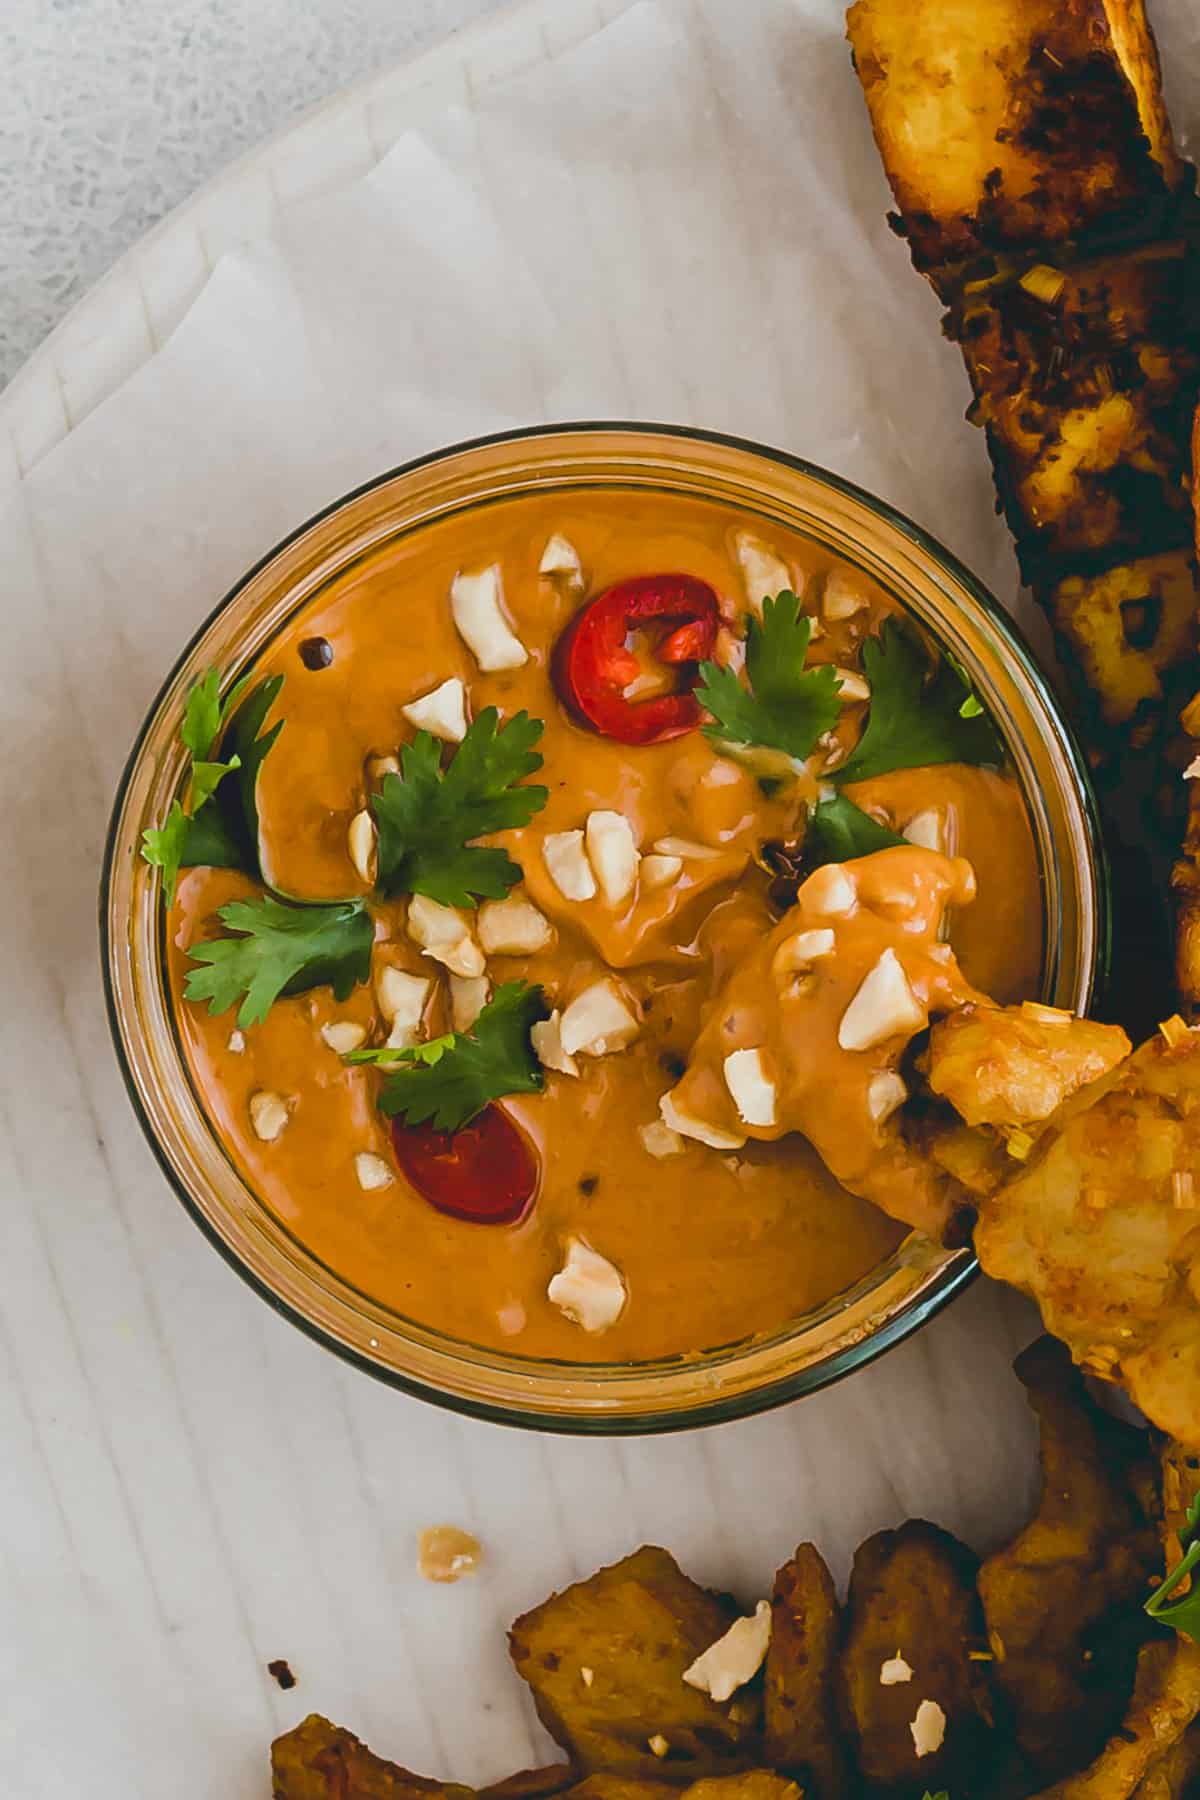 satay sauce topped with cilanto, chili, and peanuts